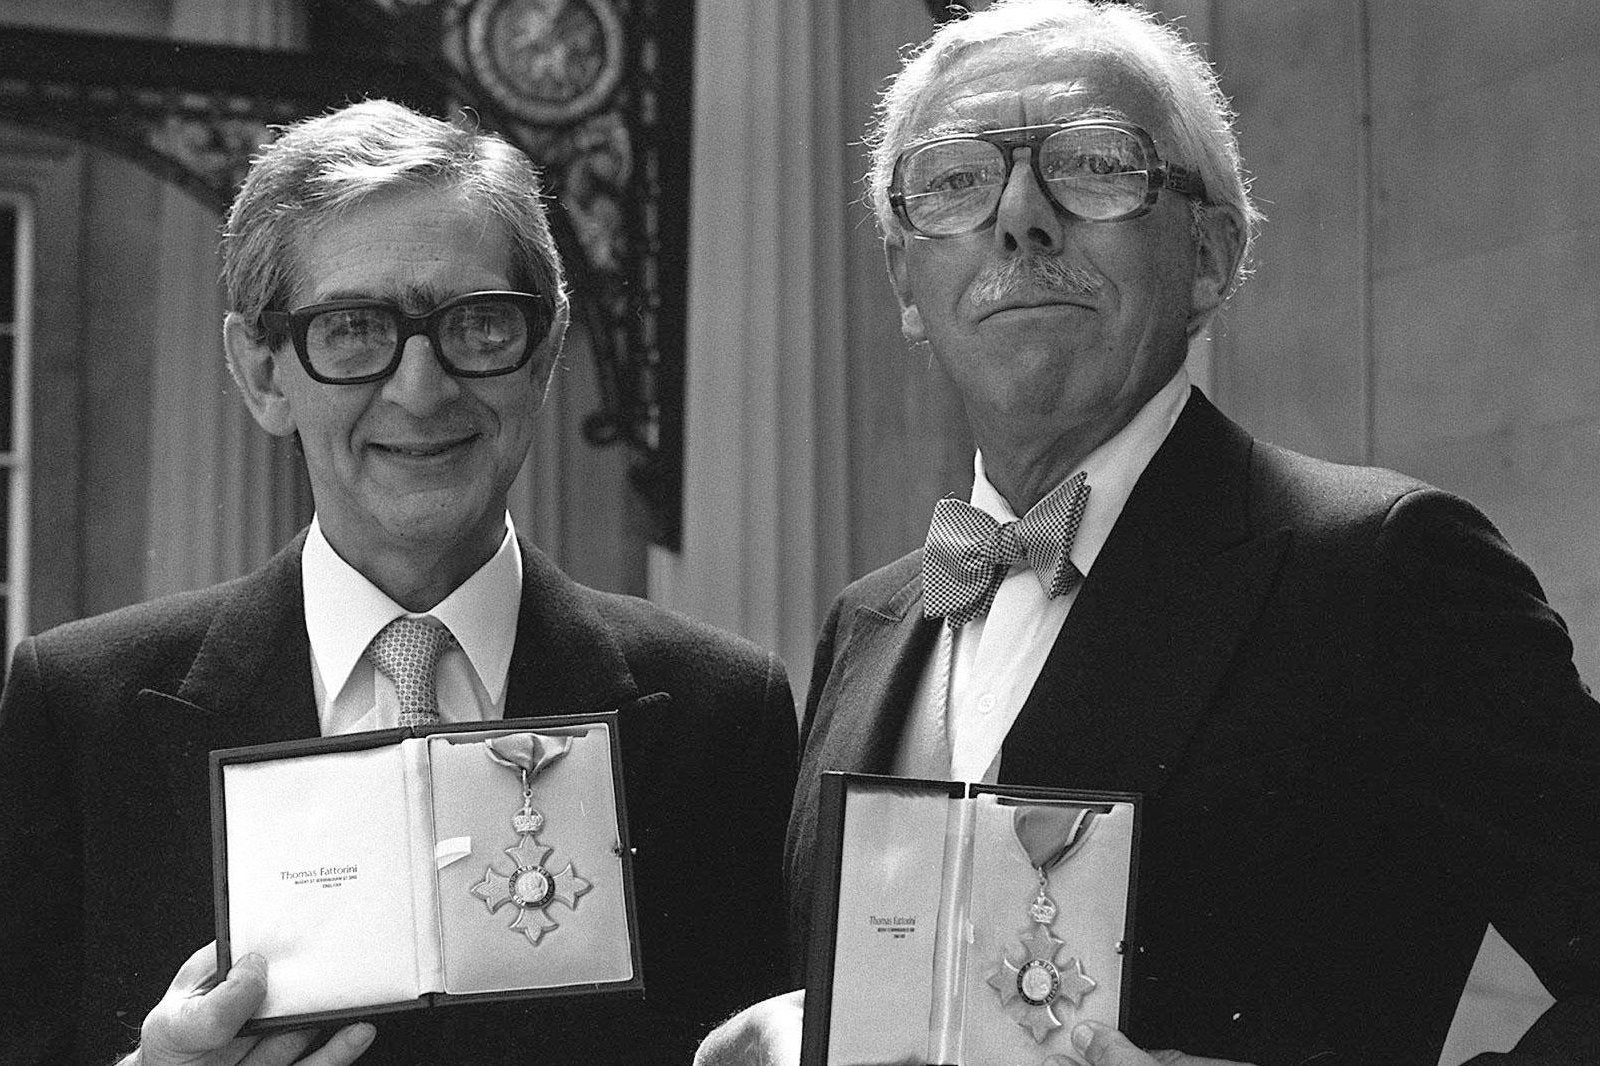 &#13;
Denis Norden and Frank Muir with their CBEs at Buckingham Palace &#13;